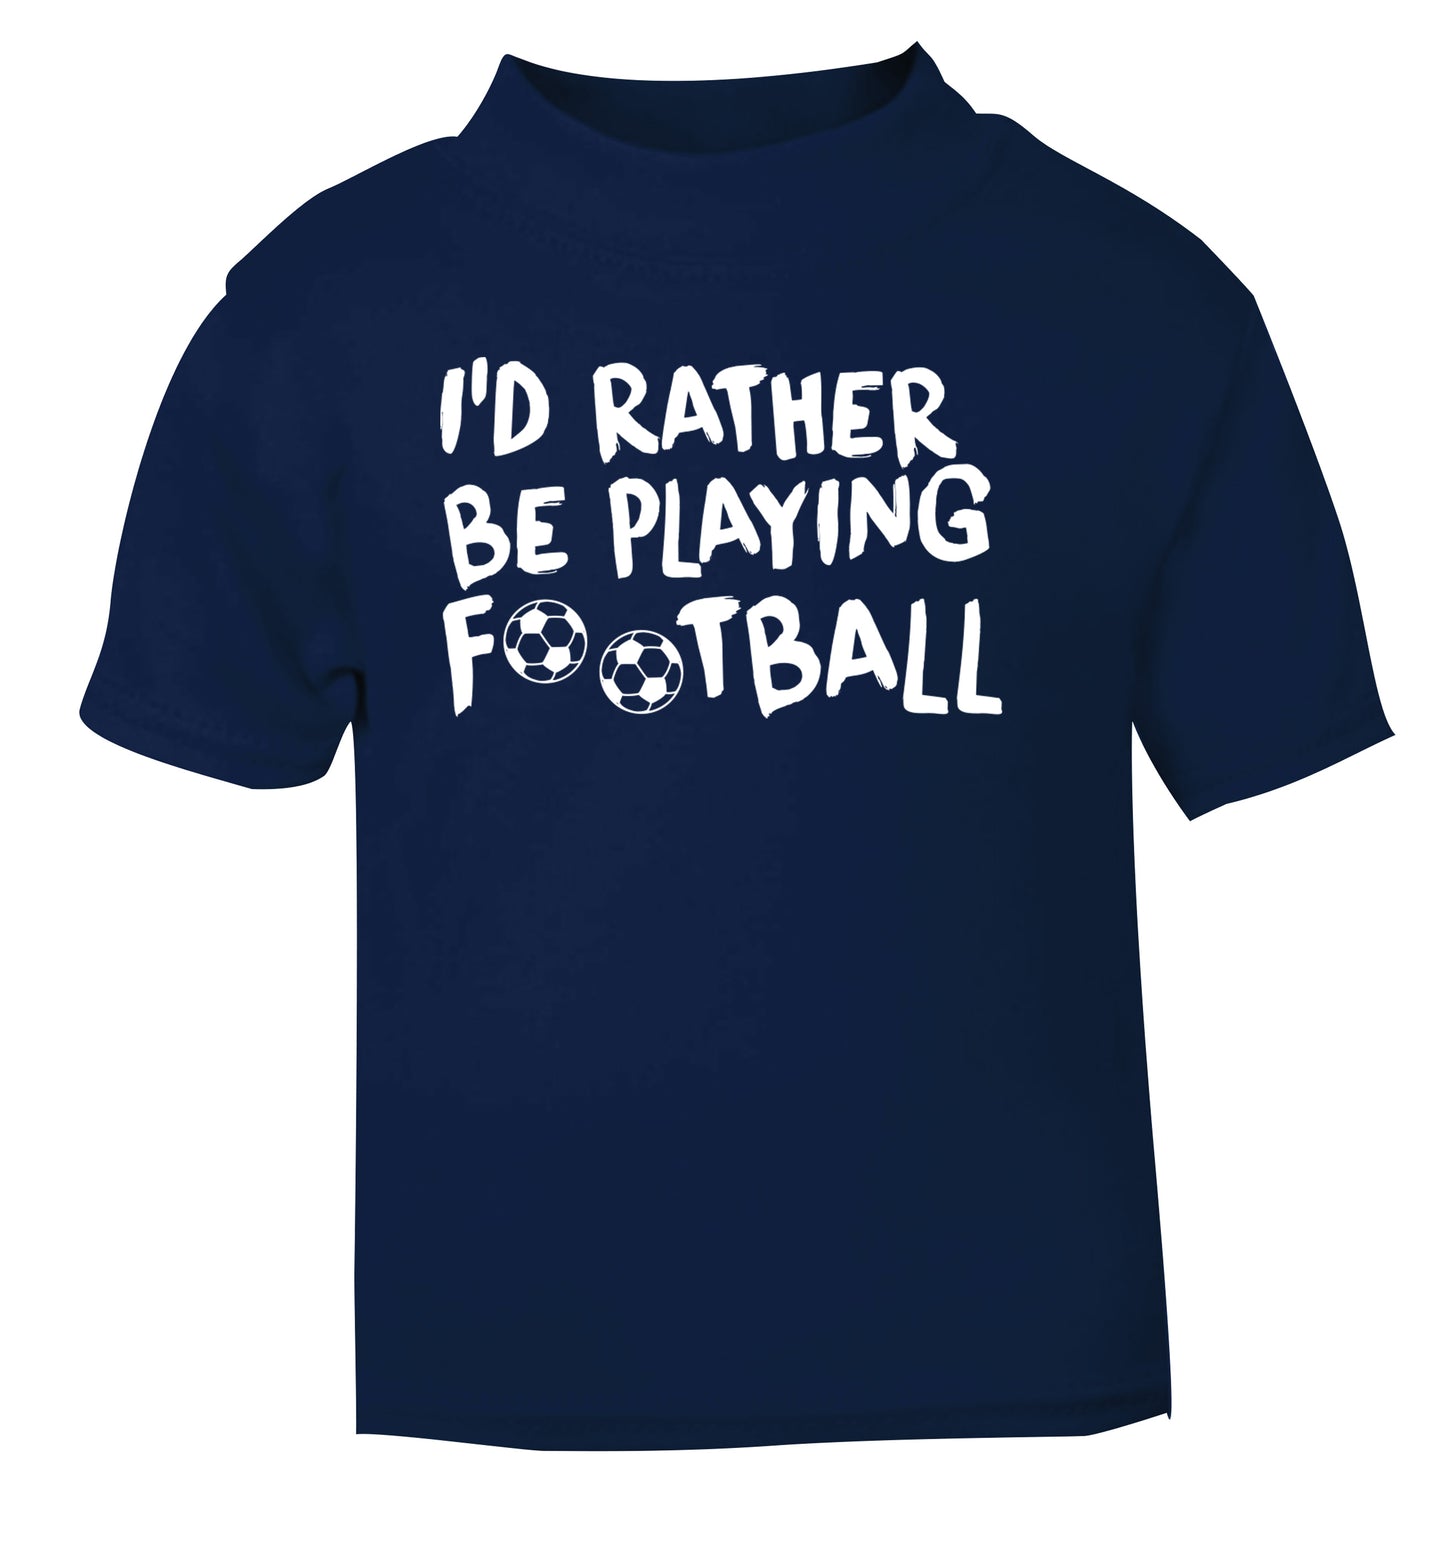 I'd rather be playing football navy Baby Toddler Tshirt 2 Years